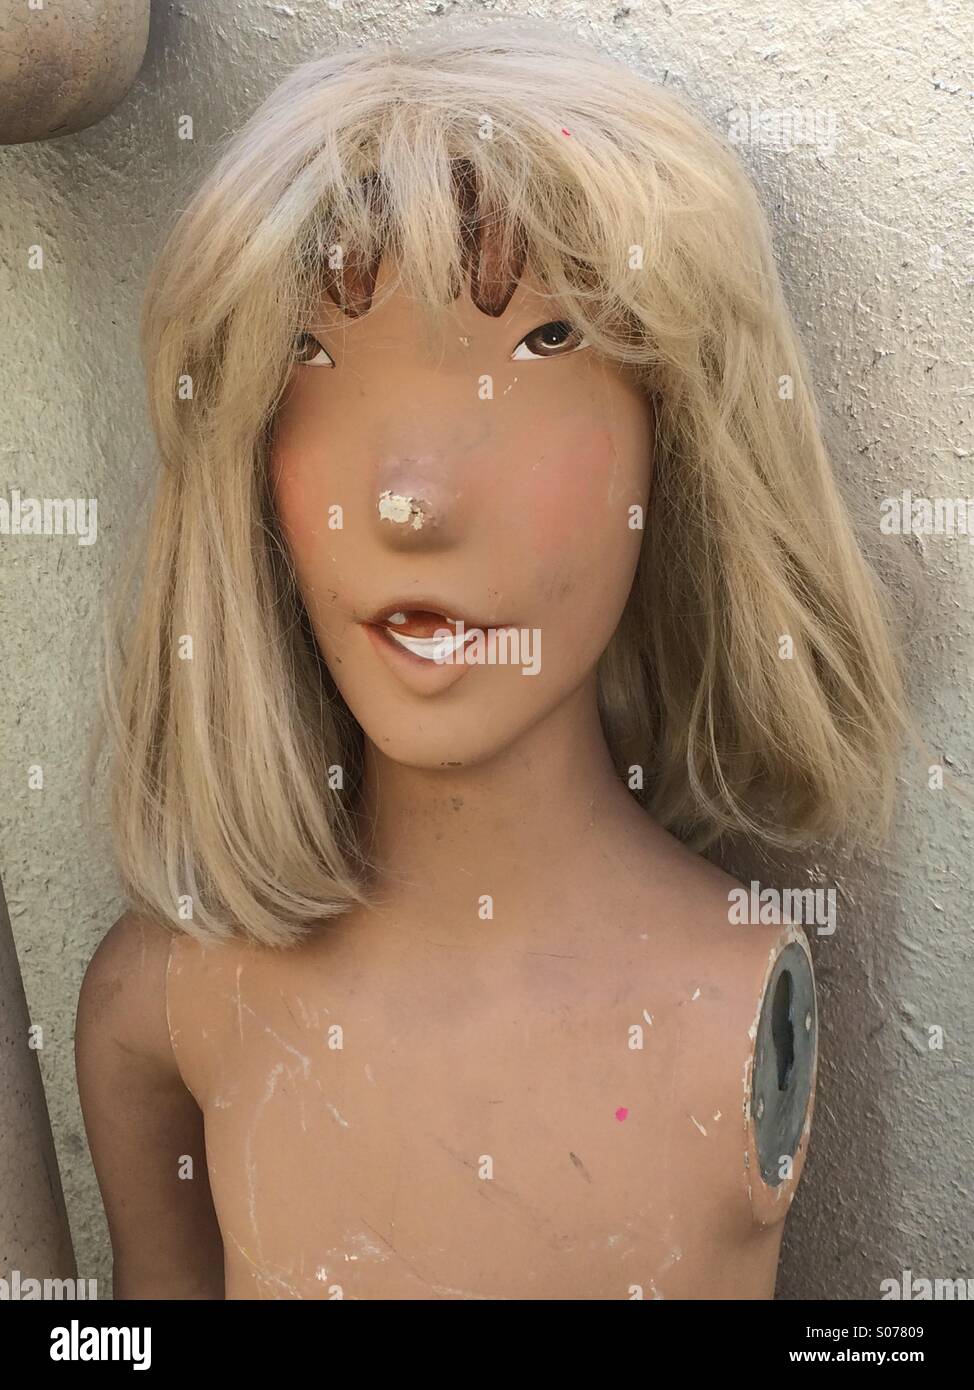 Funny looking vintage mannequin with blond hair smiling Stock Photo